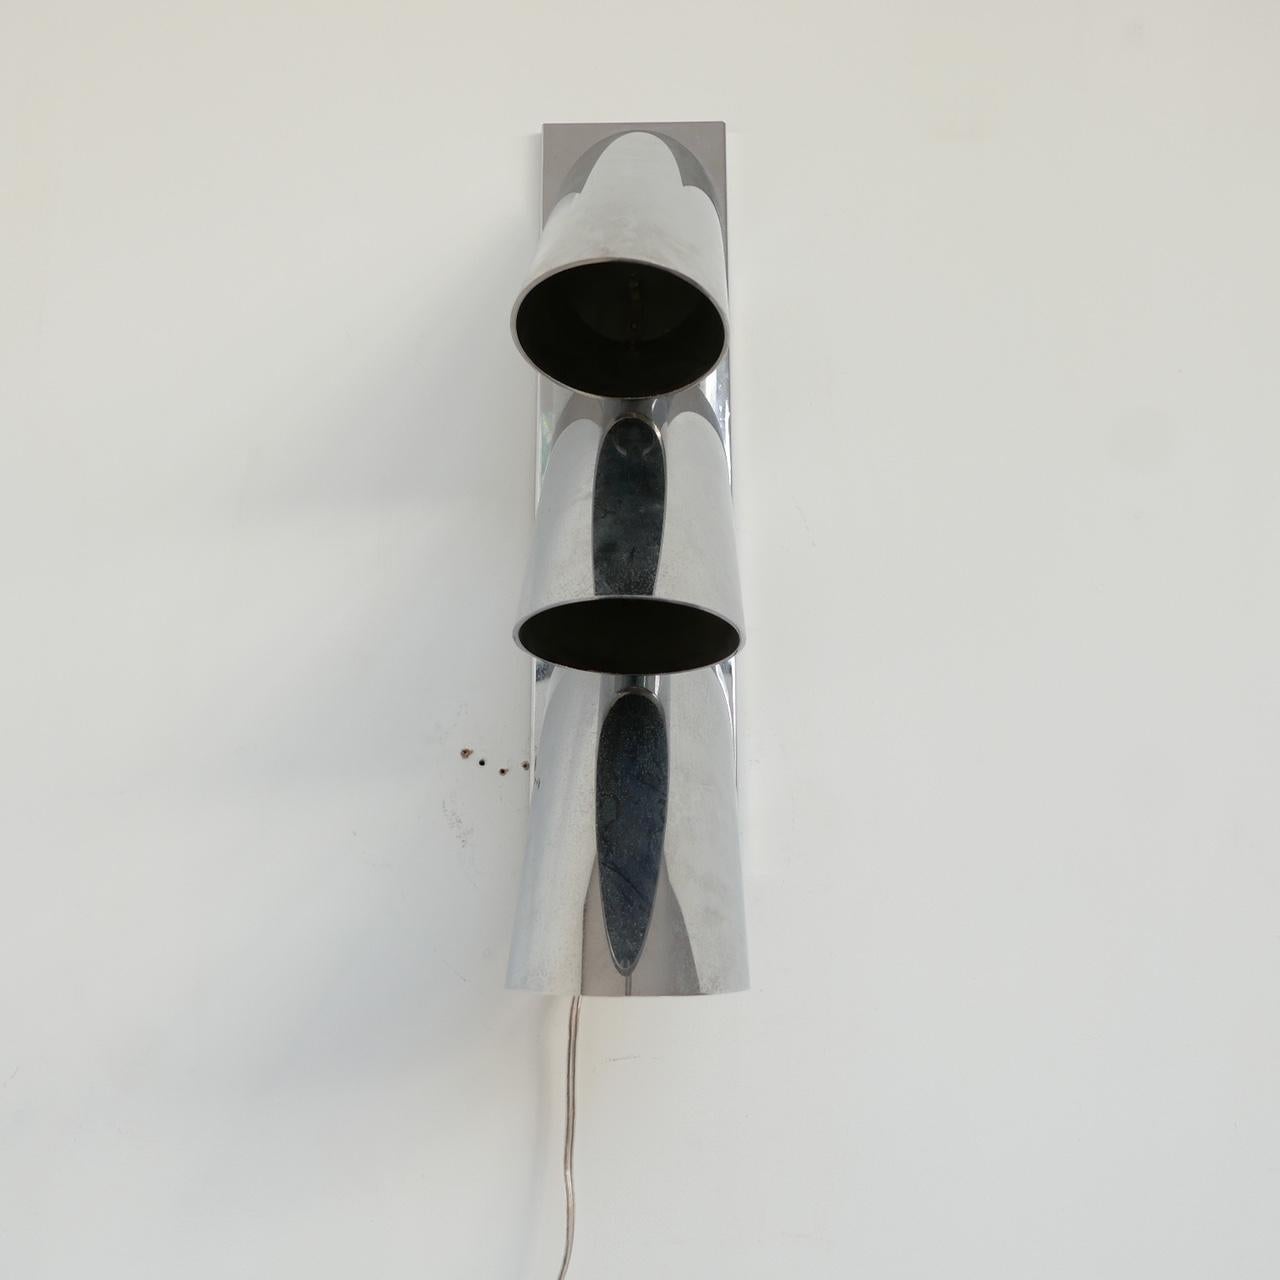 Italian Midcentury Three-Tube Directional Wall Light In Good Condition For Sale In London, GB